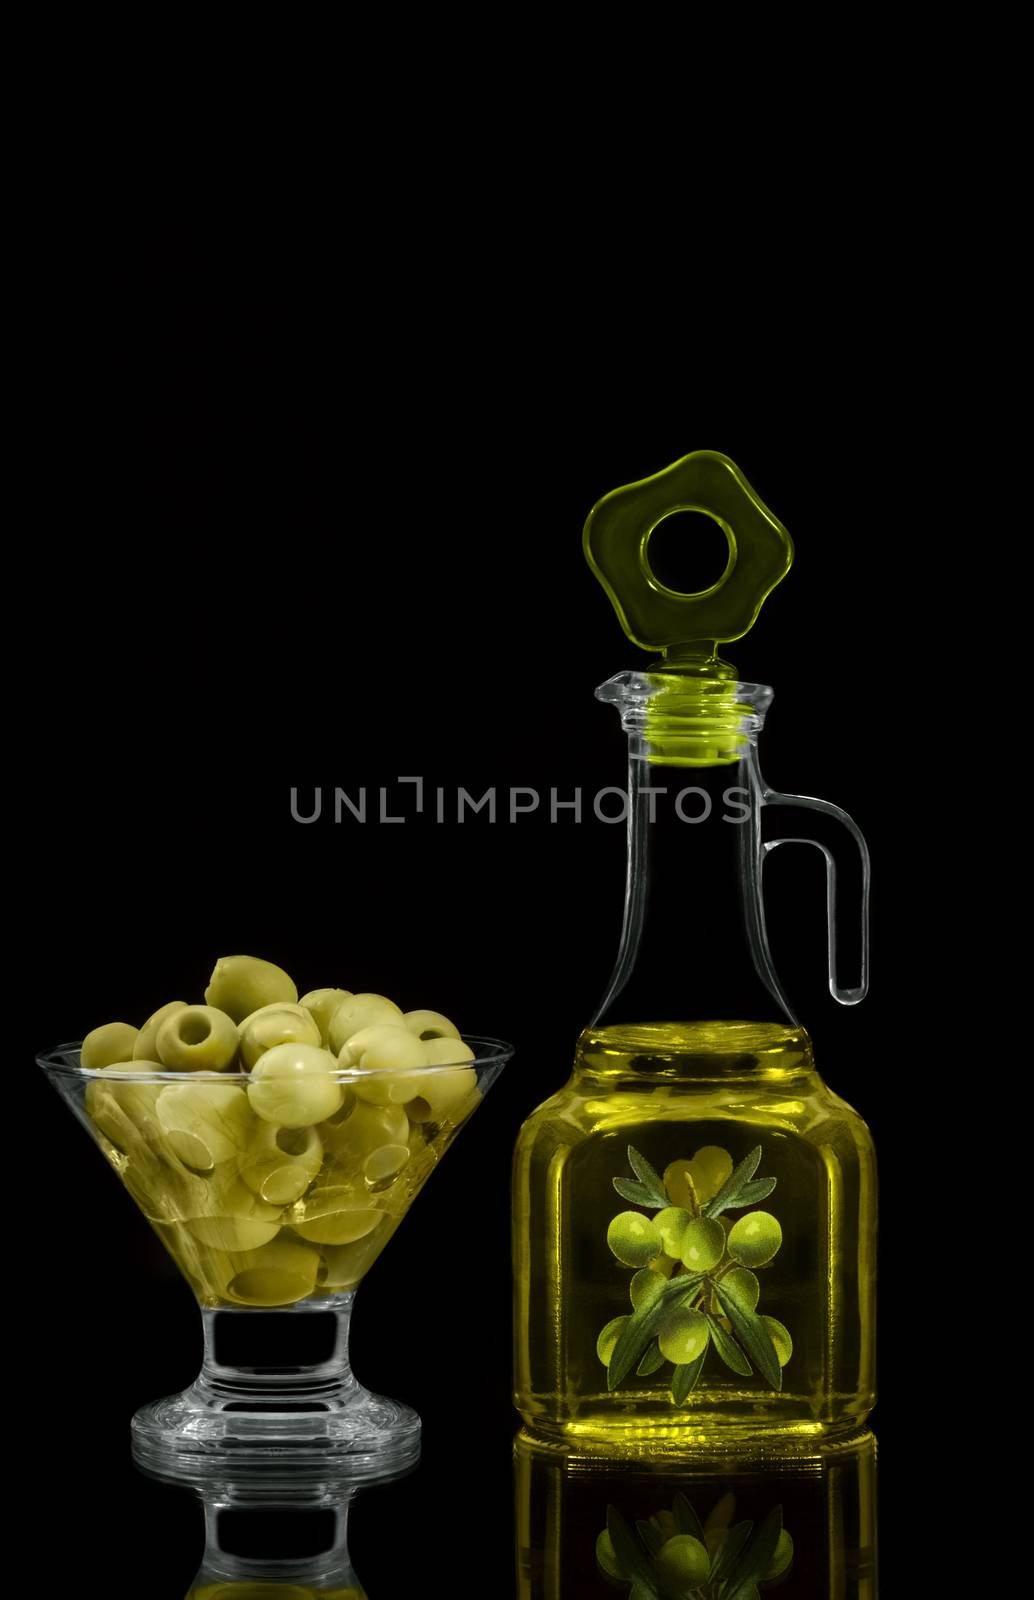 The olives in the bowl and oil in the bottle, on black background.